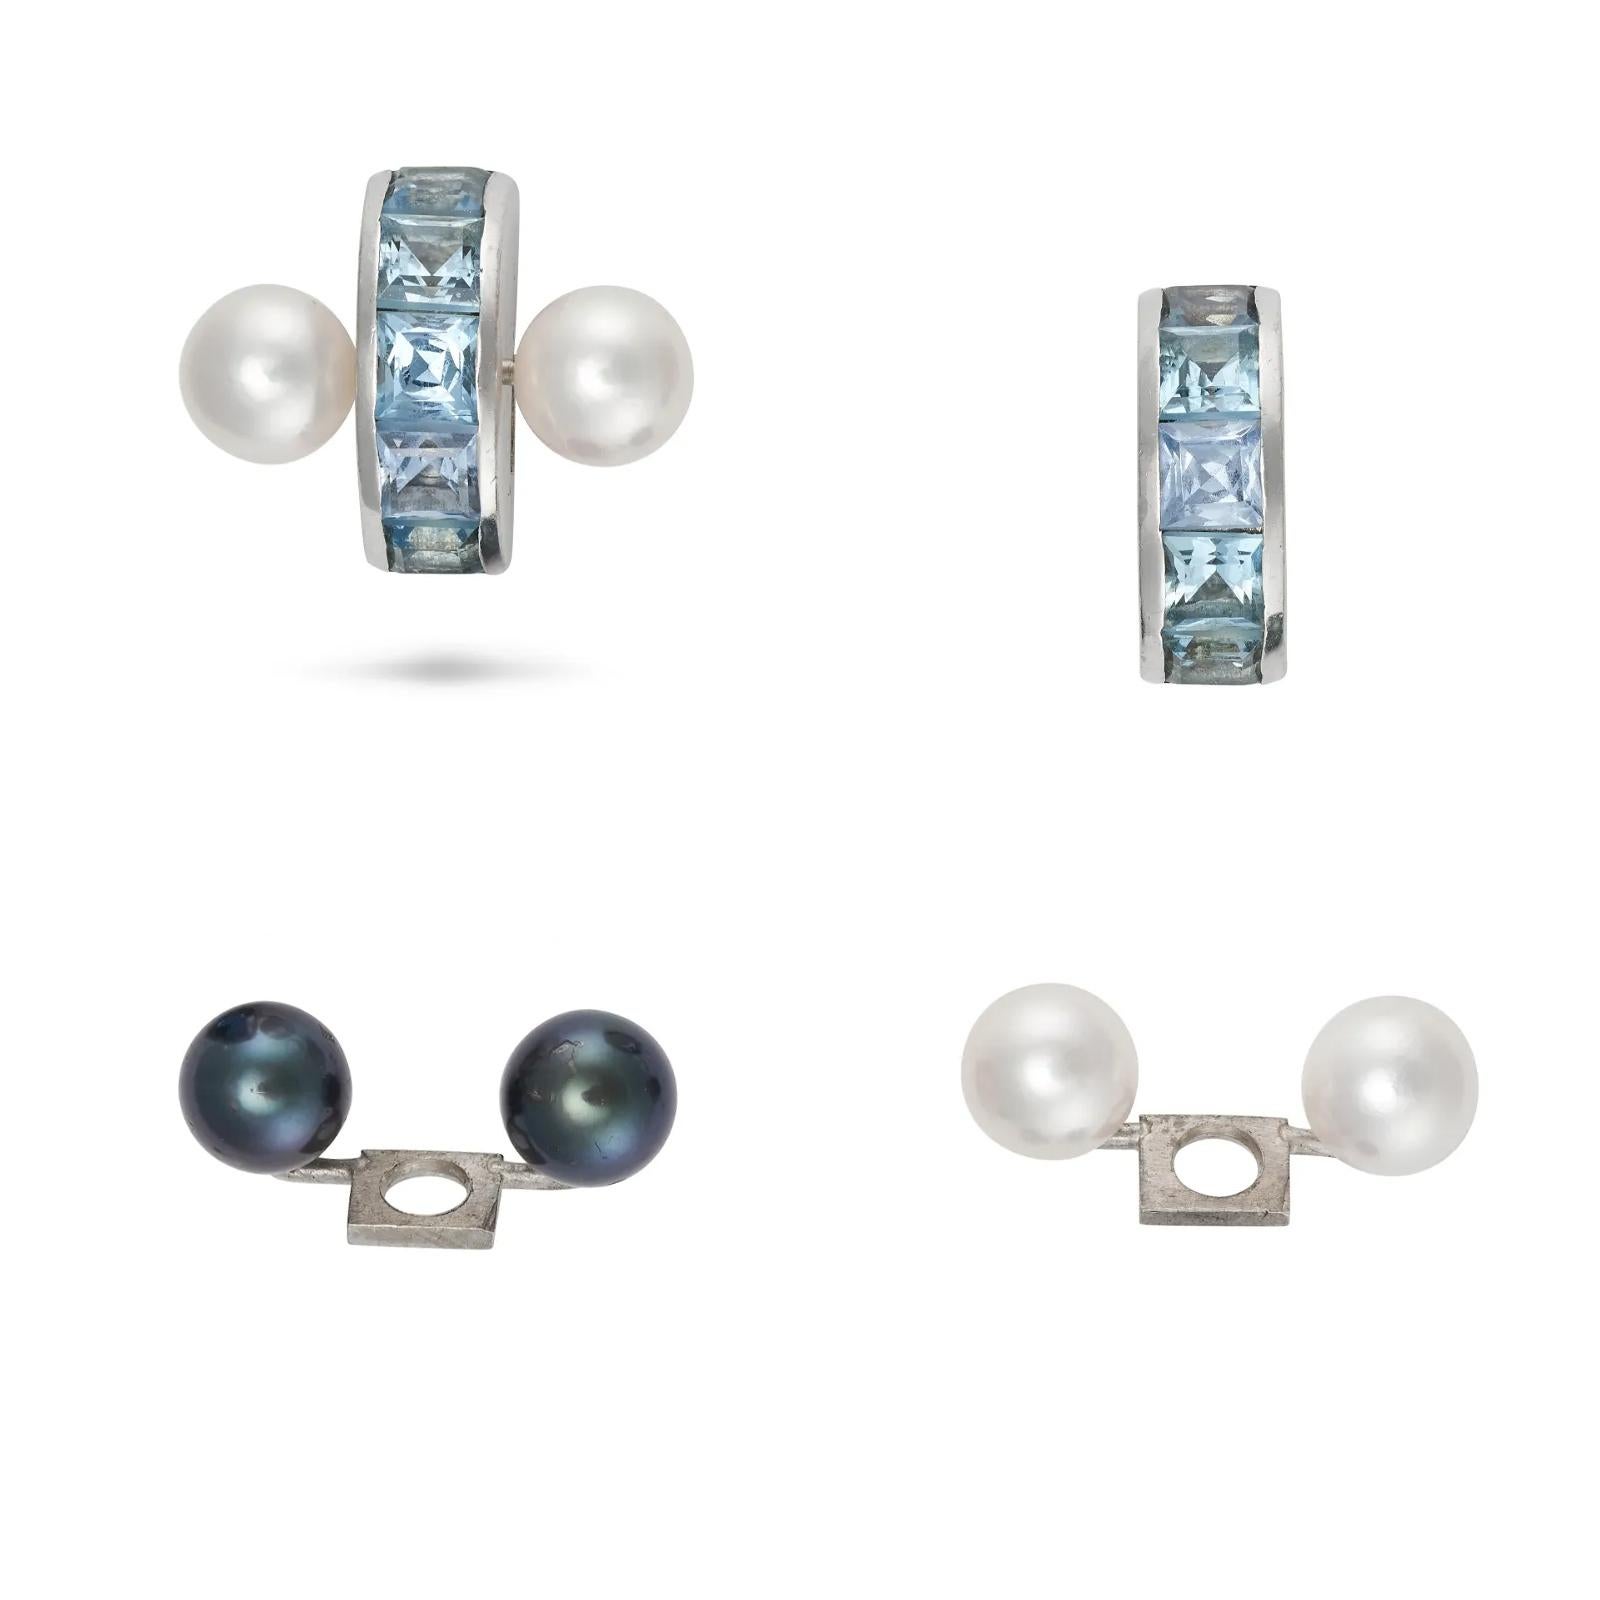 A pair of interchangeable aquamarine and pearl earrings. Each earring can be transformed in a matter of minutes from White Pearls to Dark Grey Pearls or just Aquamarine studs.

You only need a screwdriver, open just one screw and you can change the